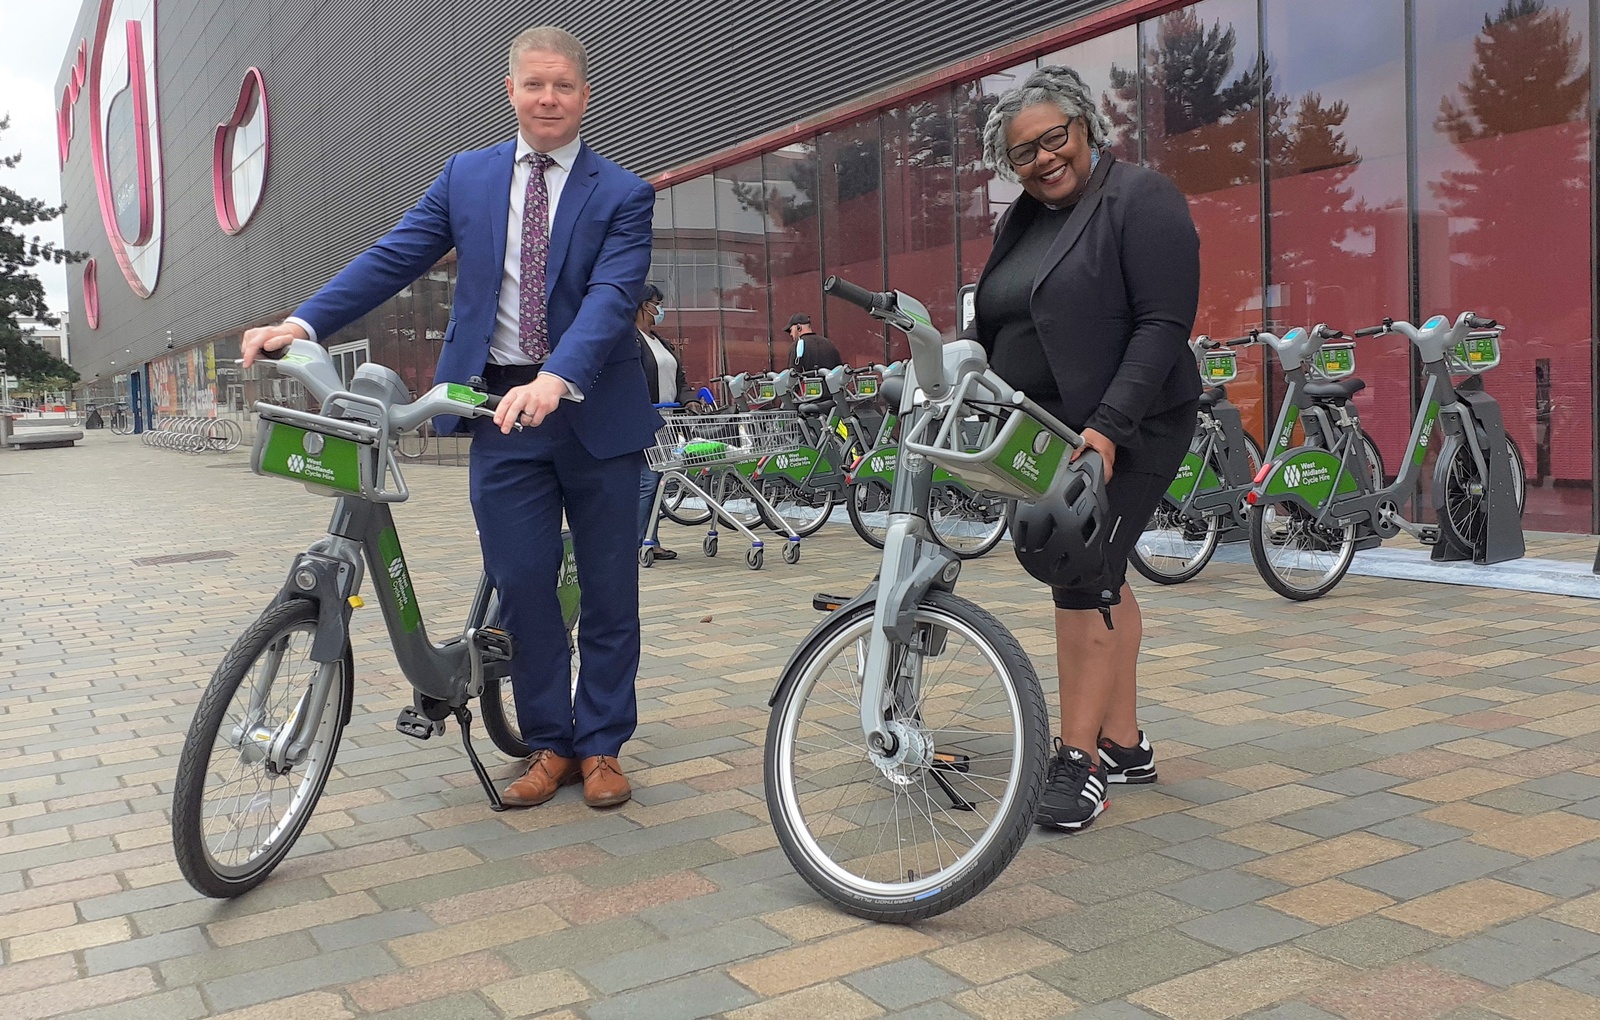 West Midlands Cycle Hire arrives on the streets of Sandwell